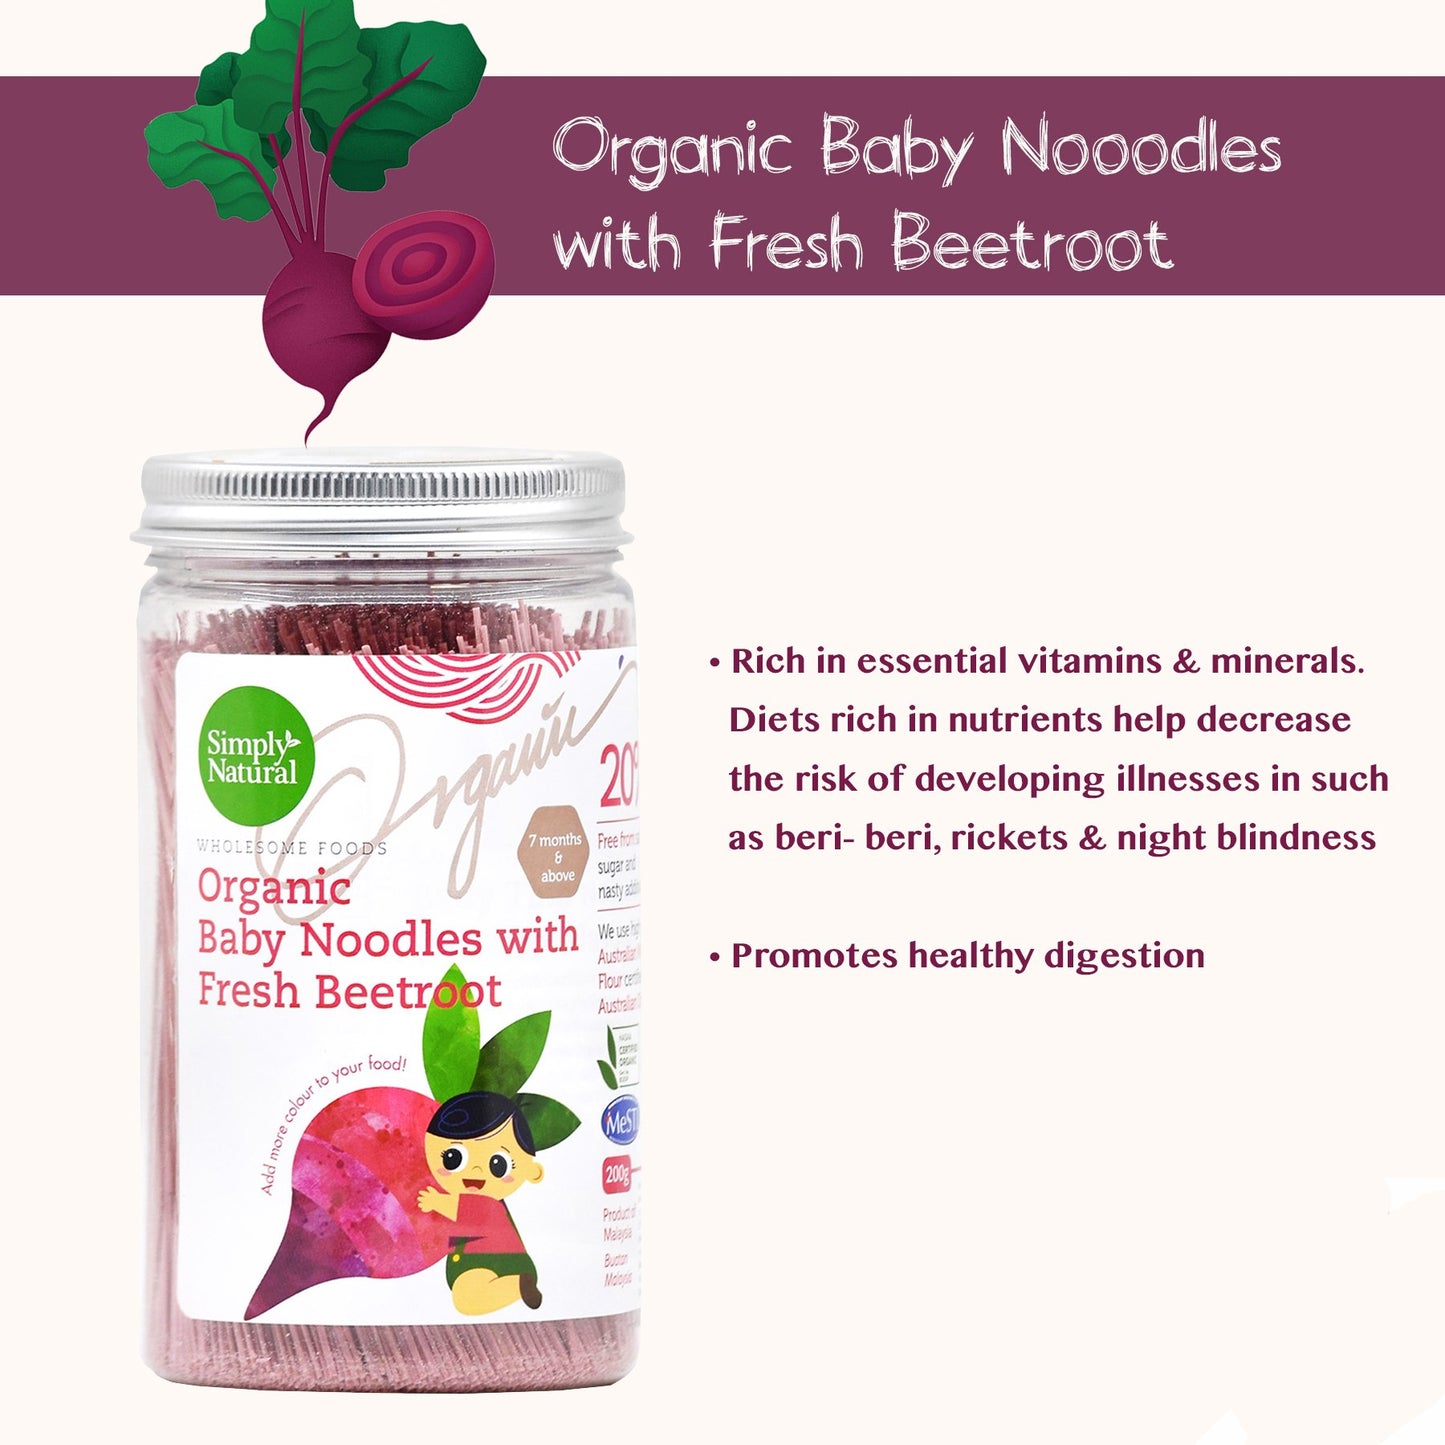 Simply Natural Organic Baby Noodles (Beetroot)